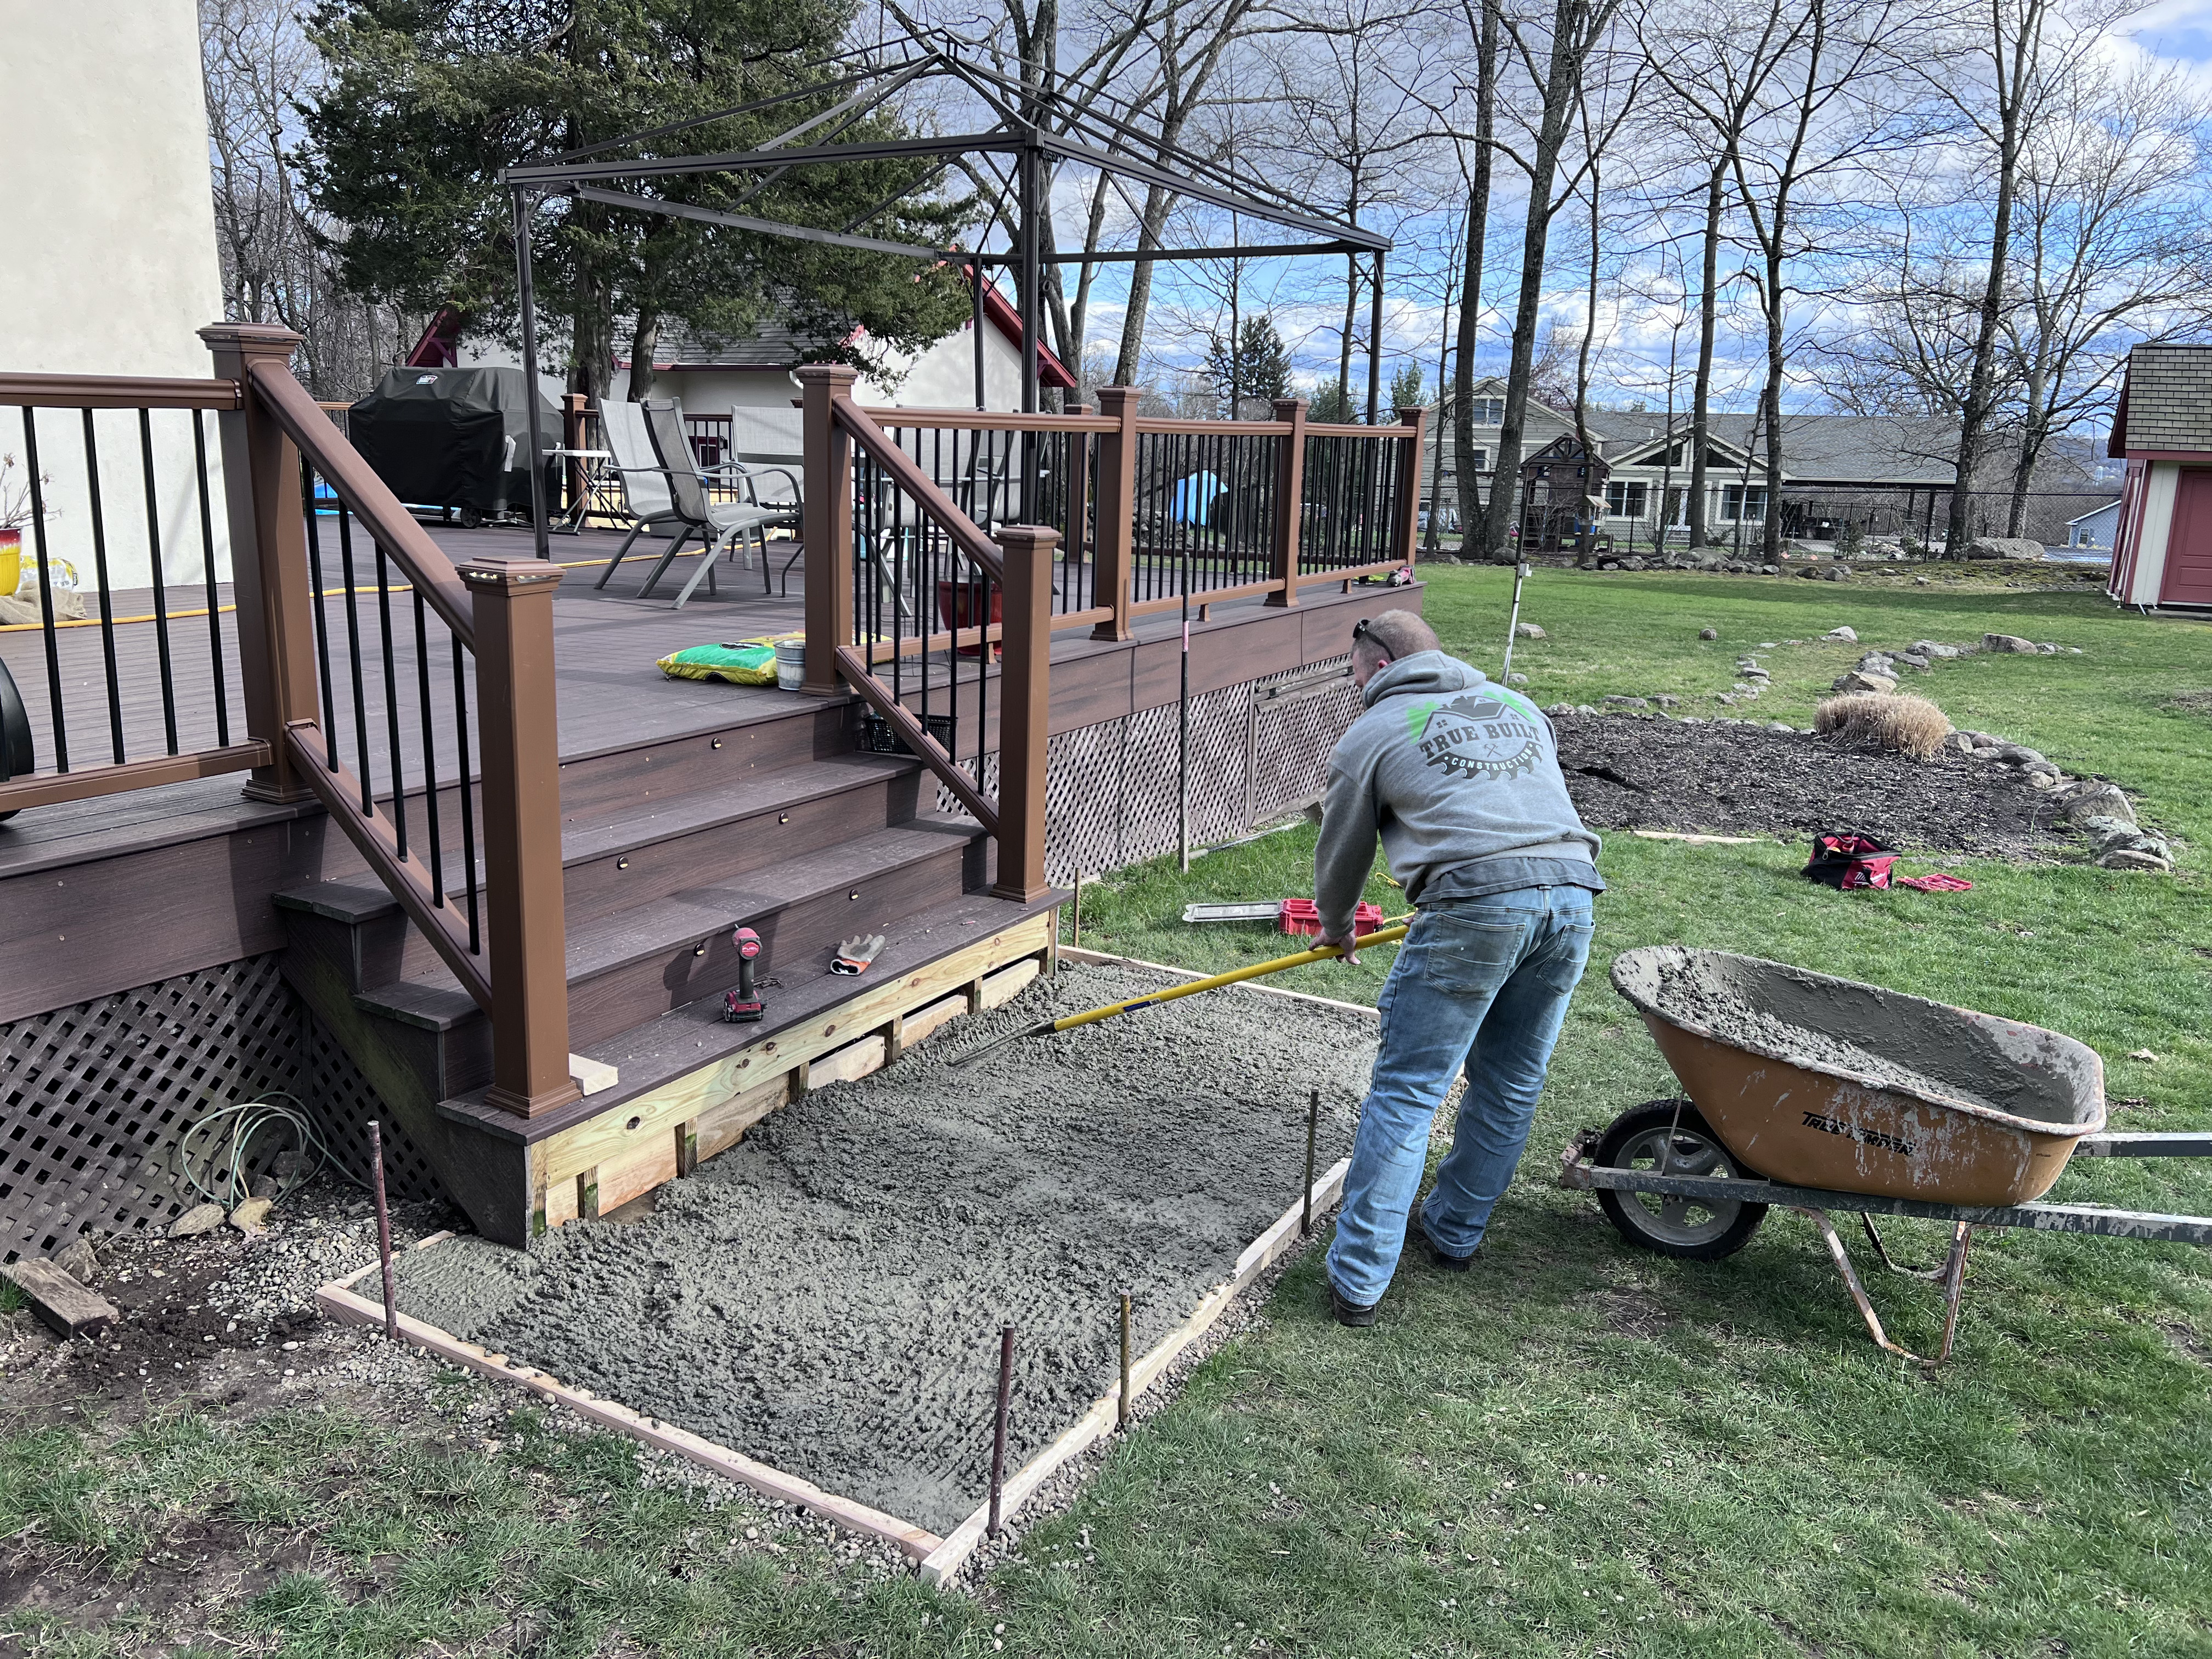 Corey Wray of True Built Construction personally grading the ground in preparation for a new deck and patio